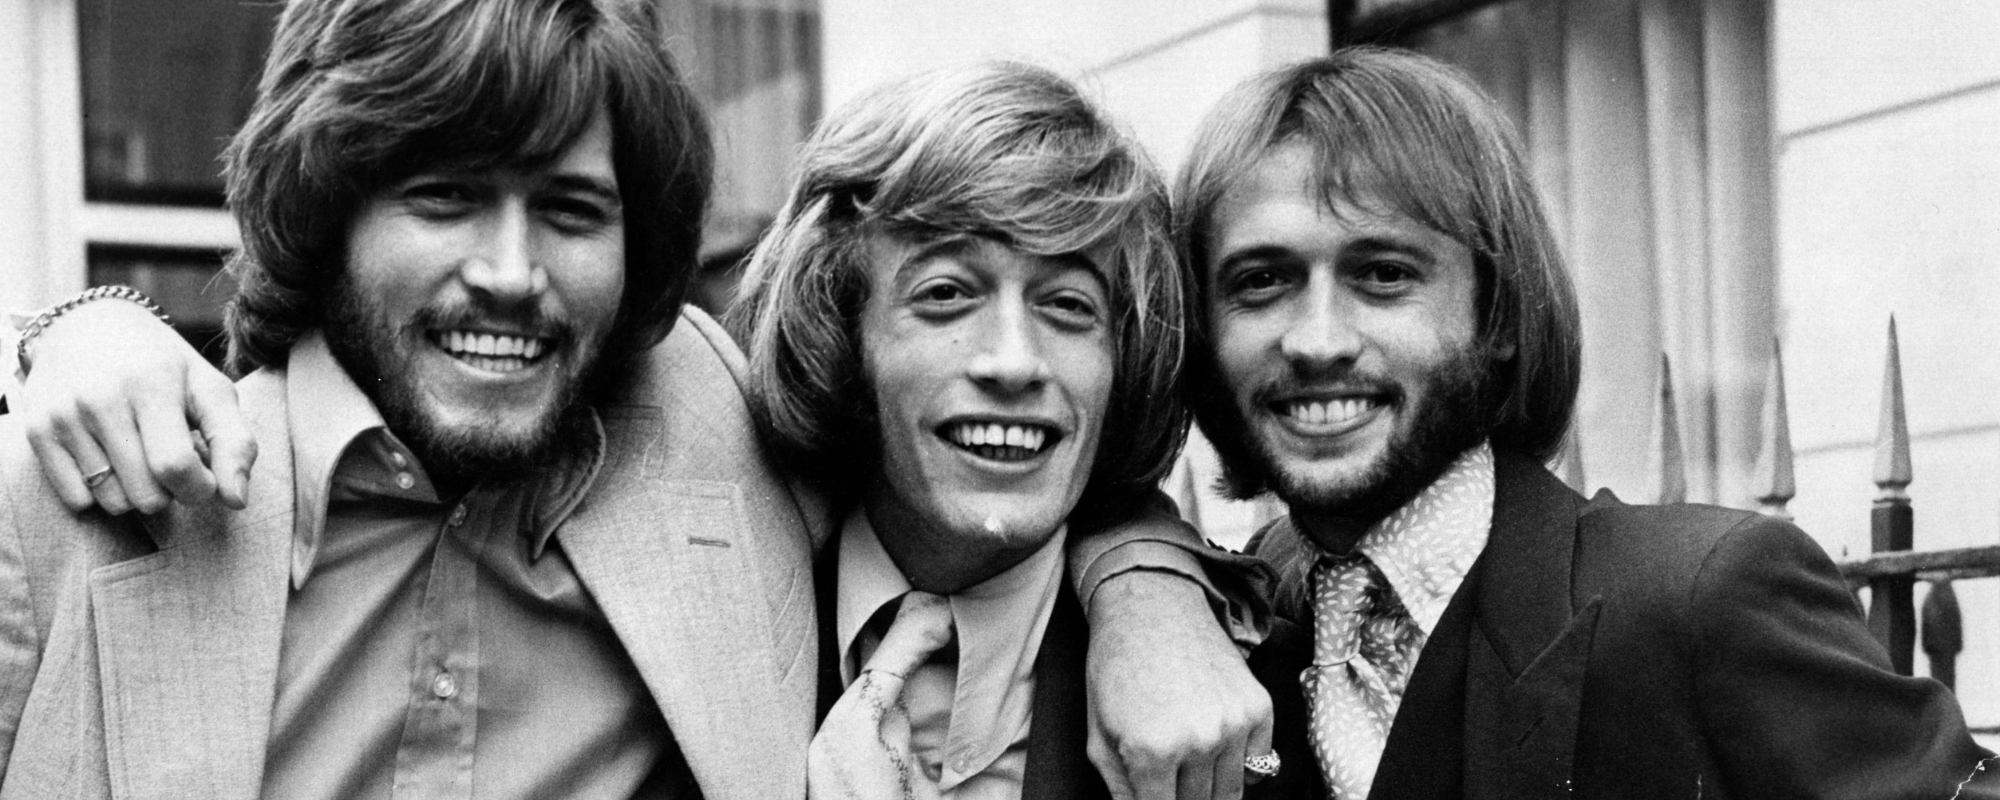 The Meaning Behind “How Can You Mend a Broken Heart” by Bee Gees